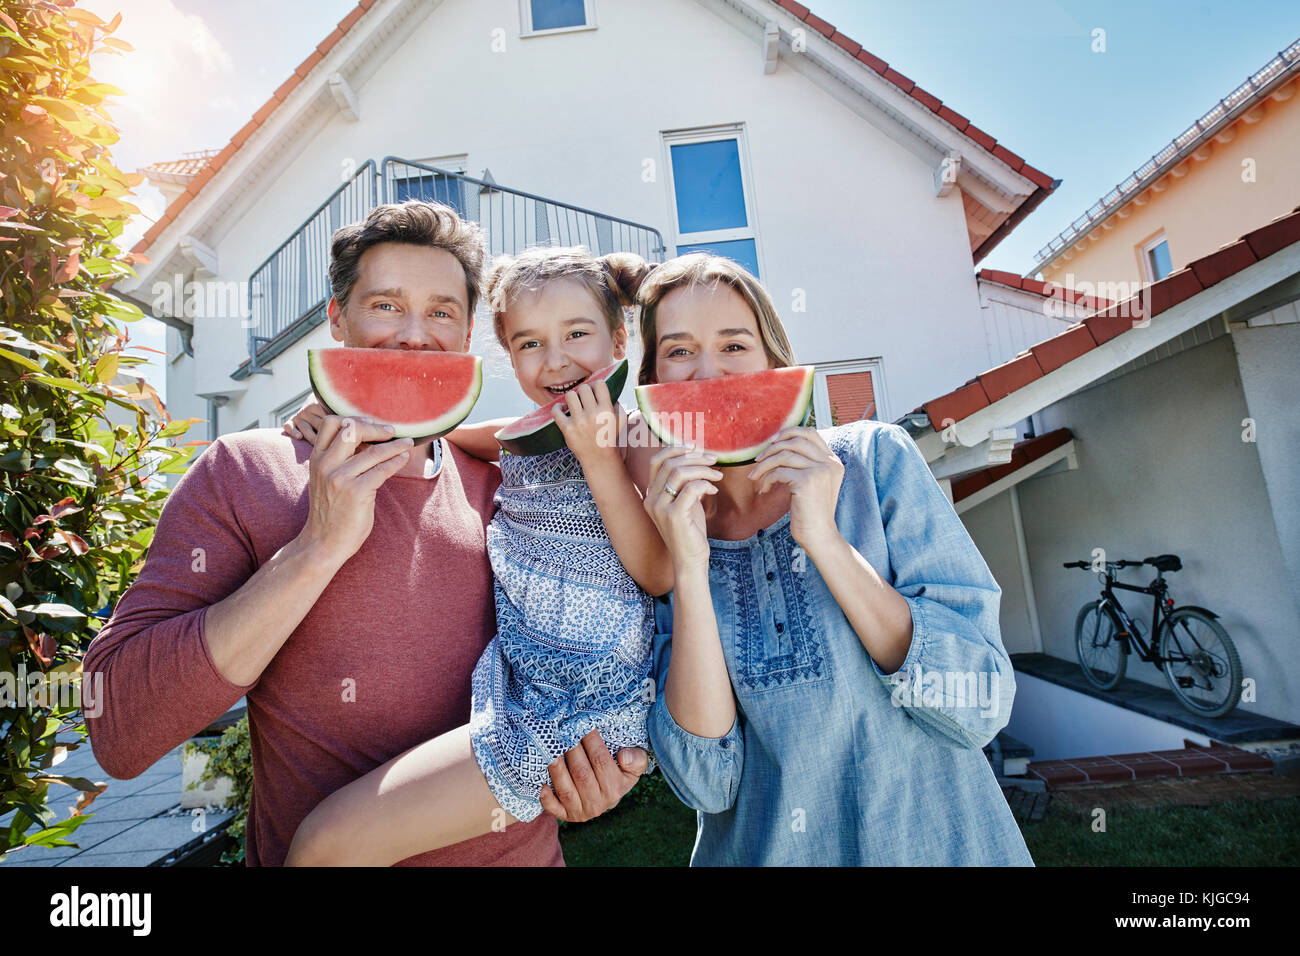 Portrait of happy family with slices of watermelon in front of their home Stock Photo